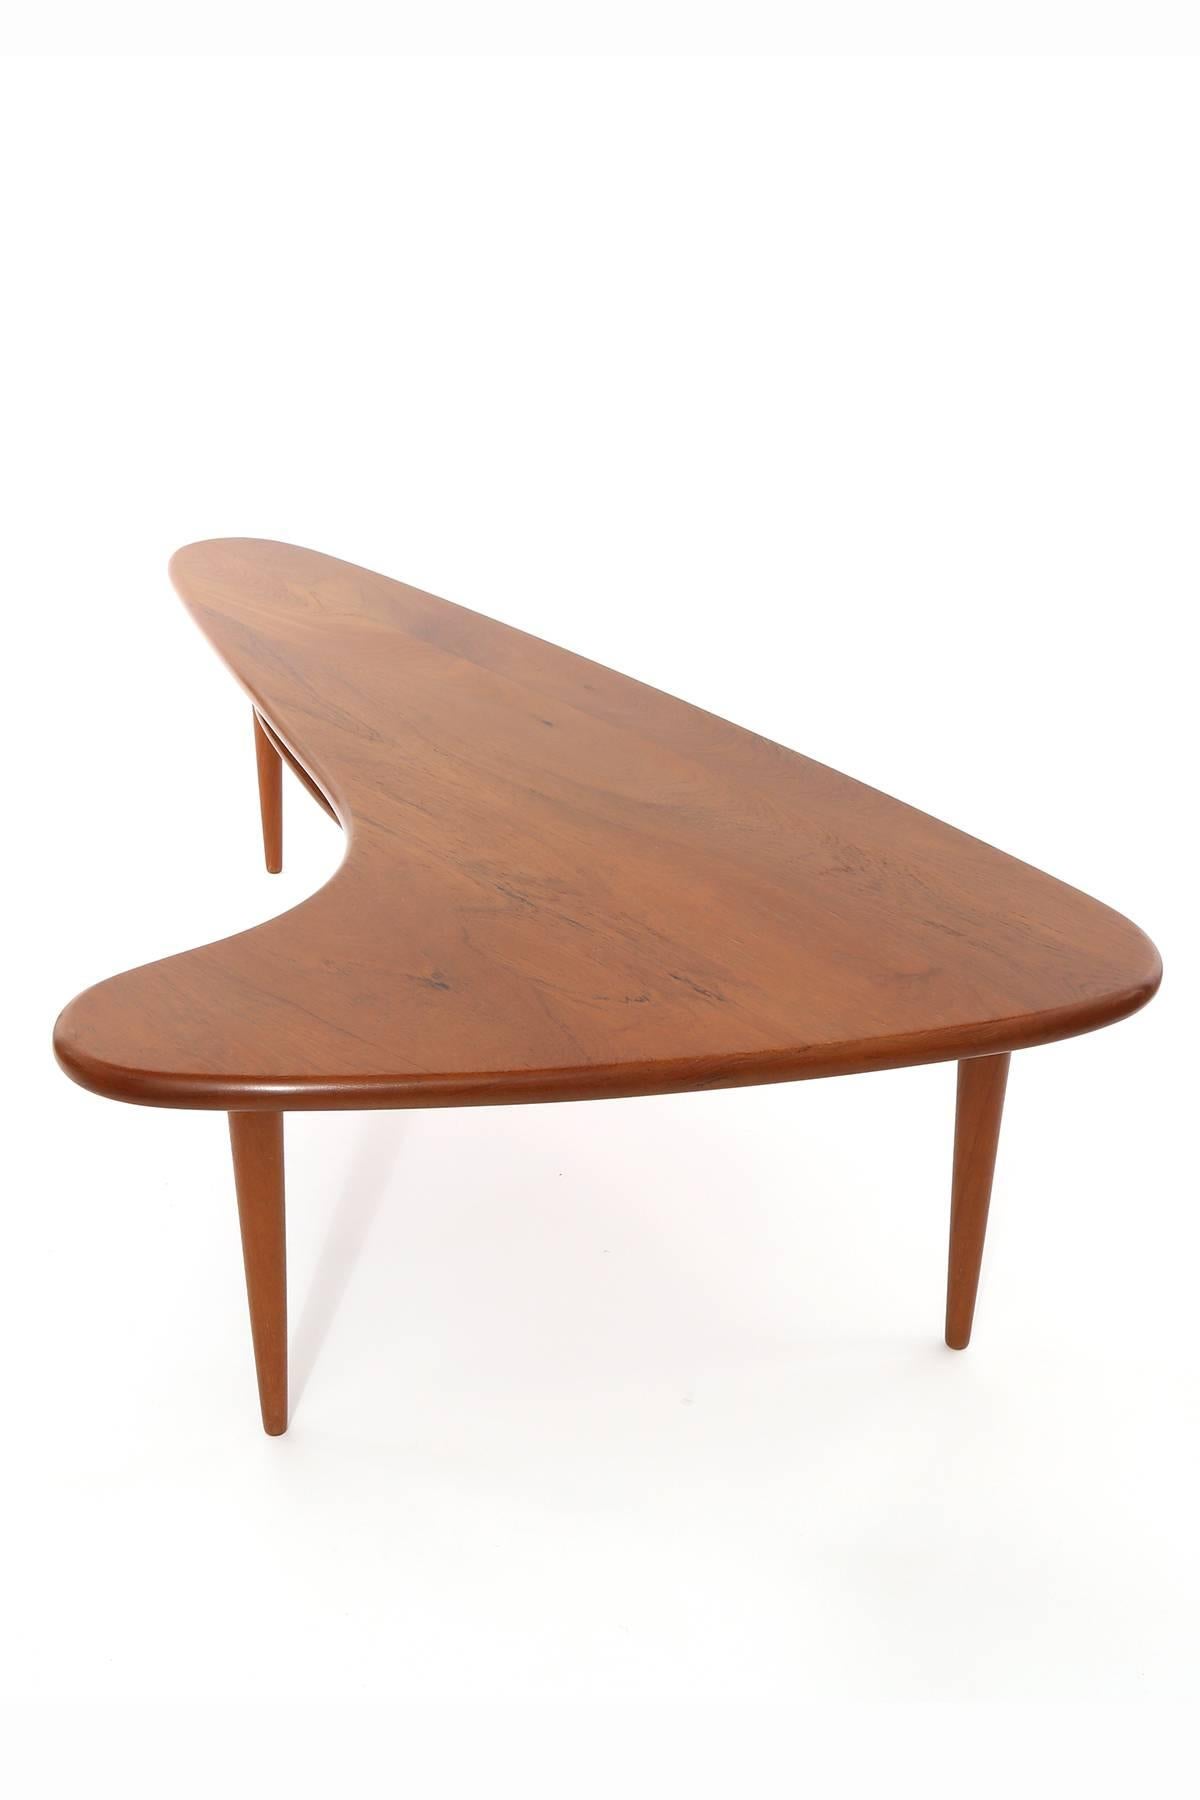 Mid-20th Century Solid Teak and Brass Free-Form Cocktail Table